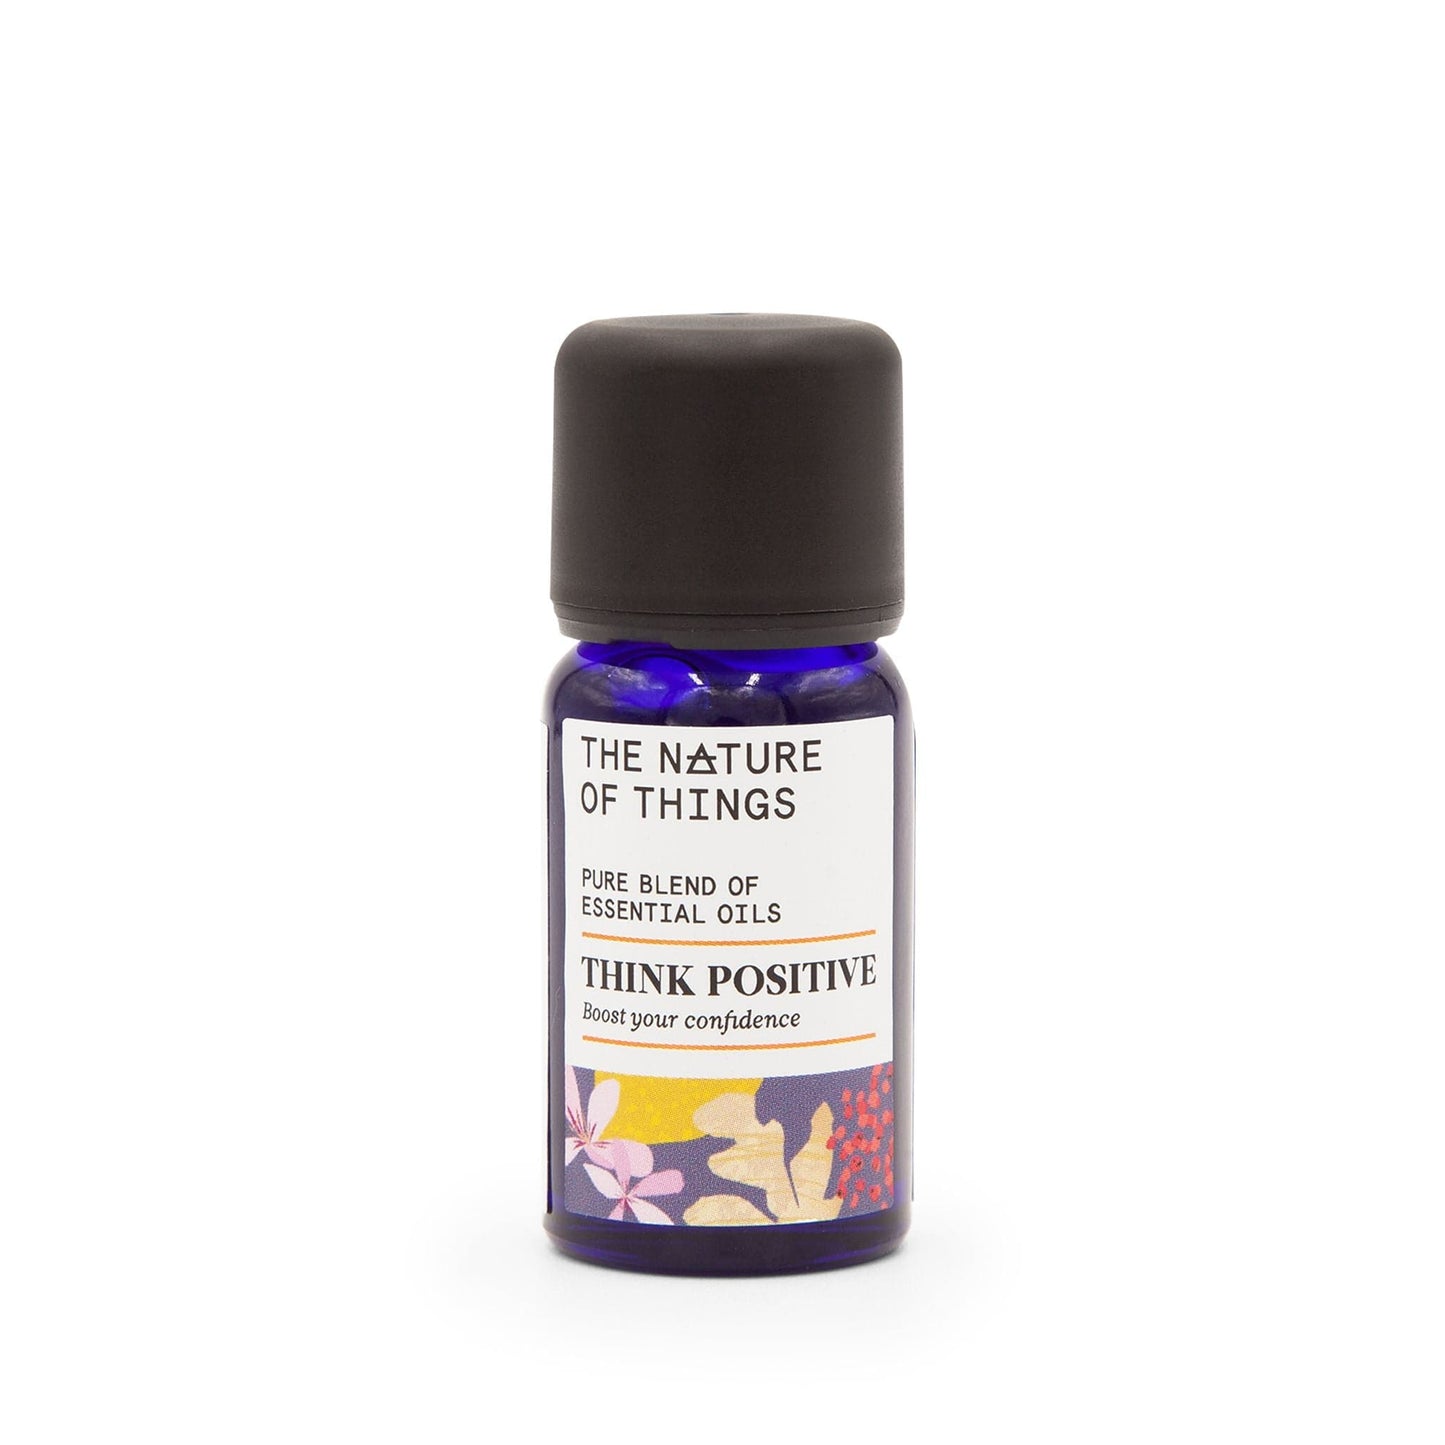 The Nature of Things Essential Oil Think Positive Essential Oil Blend 12ml - The Nature of Things